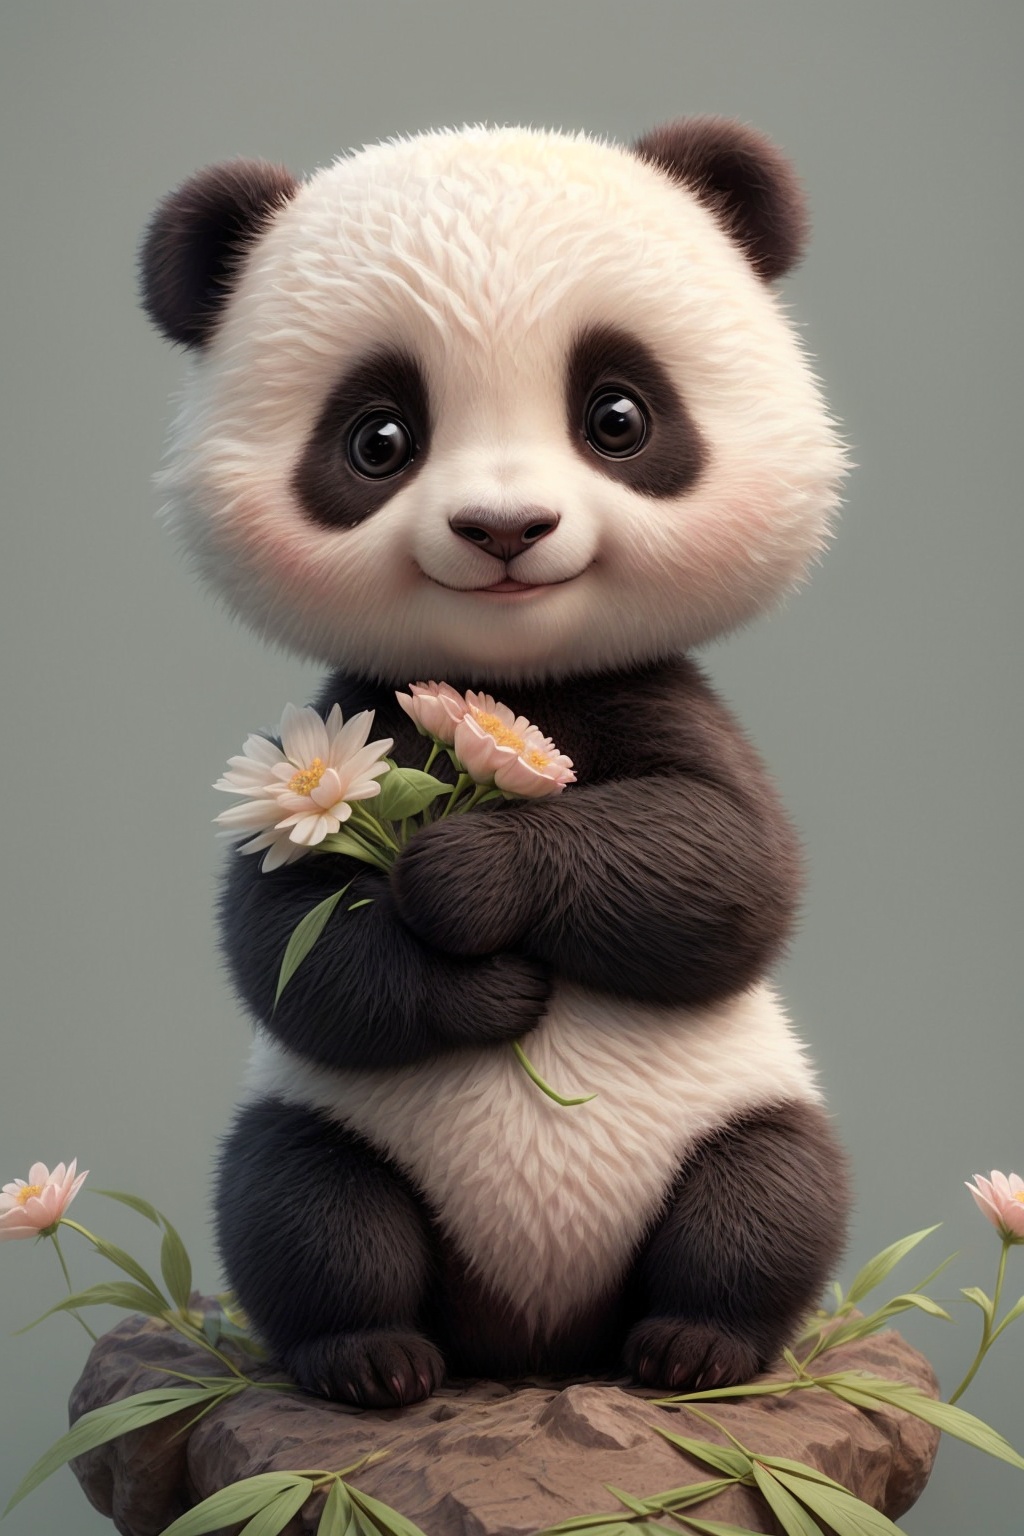 tiny cute baby panda with colorful flowers in her hands can hardly stand the flowers, close up, cinematic, award-winning, hyperrealism, photography.